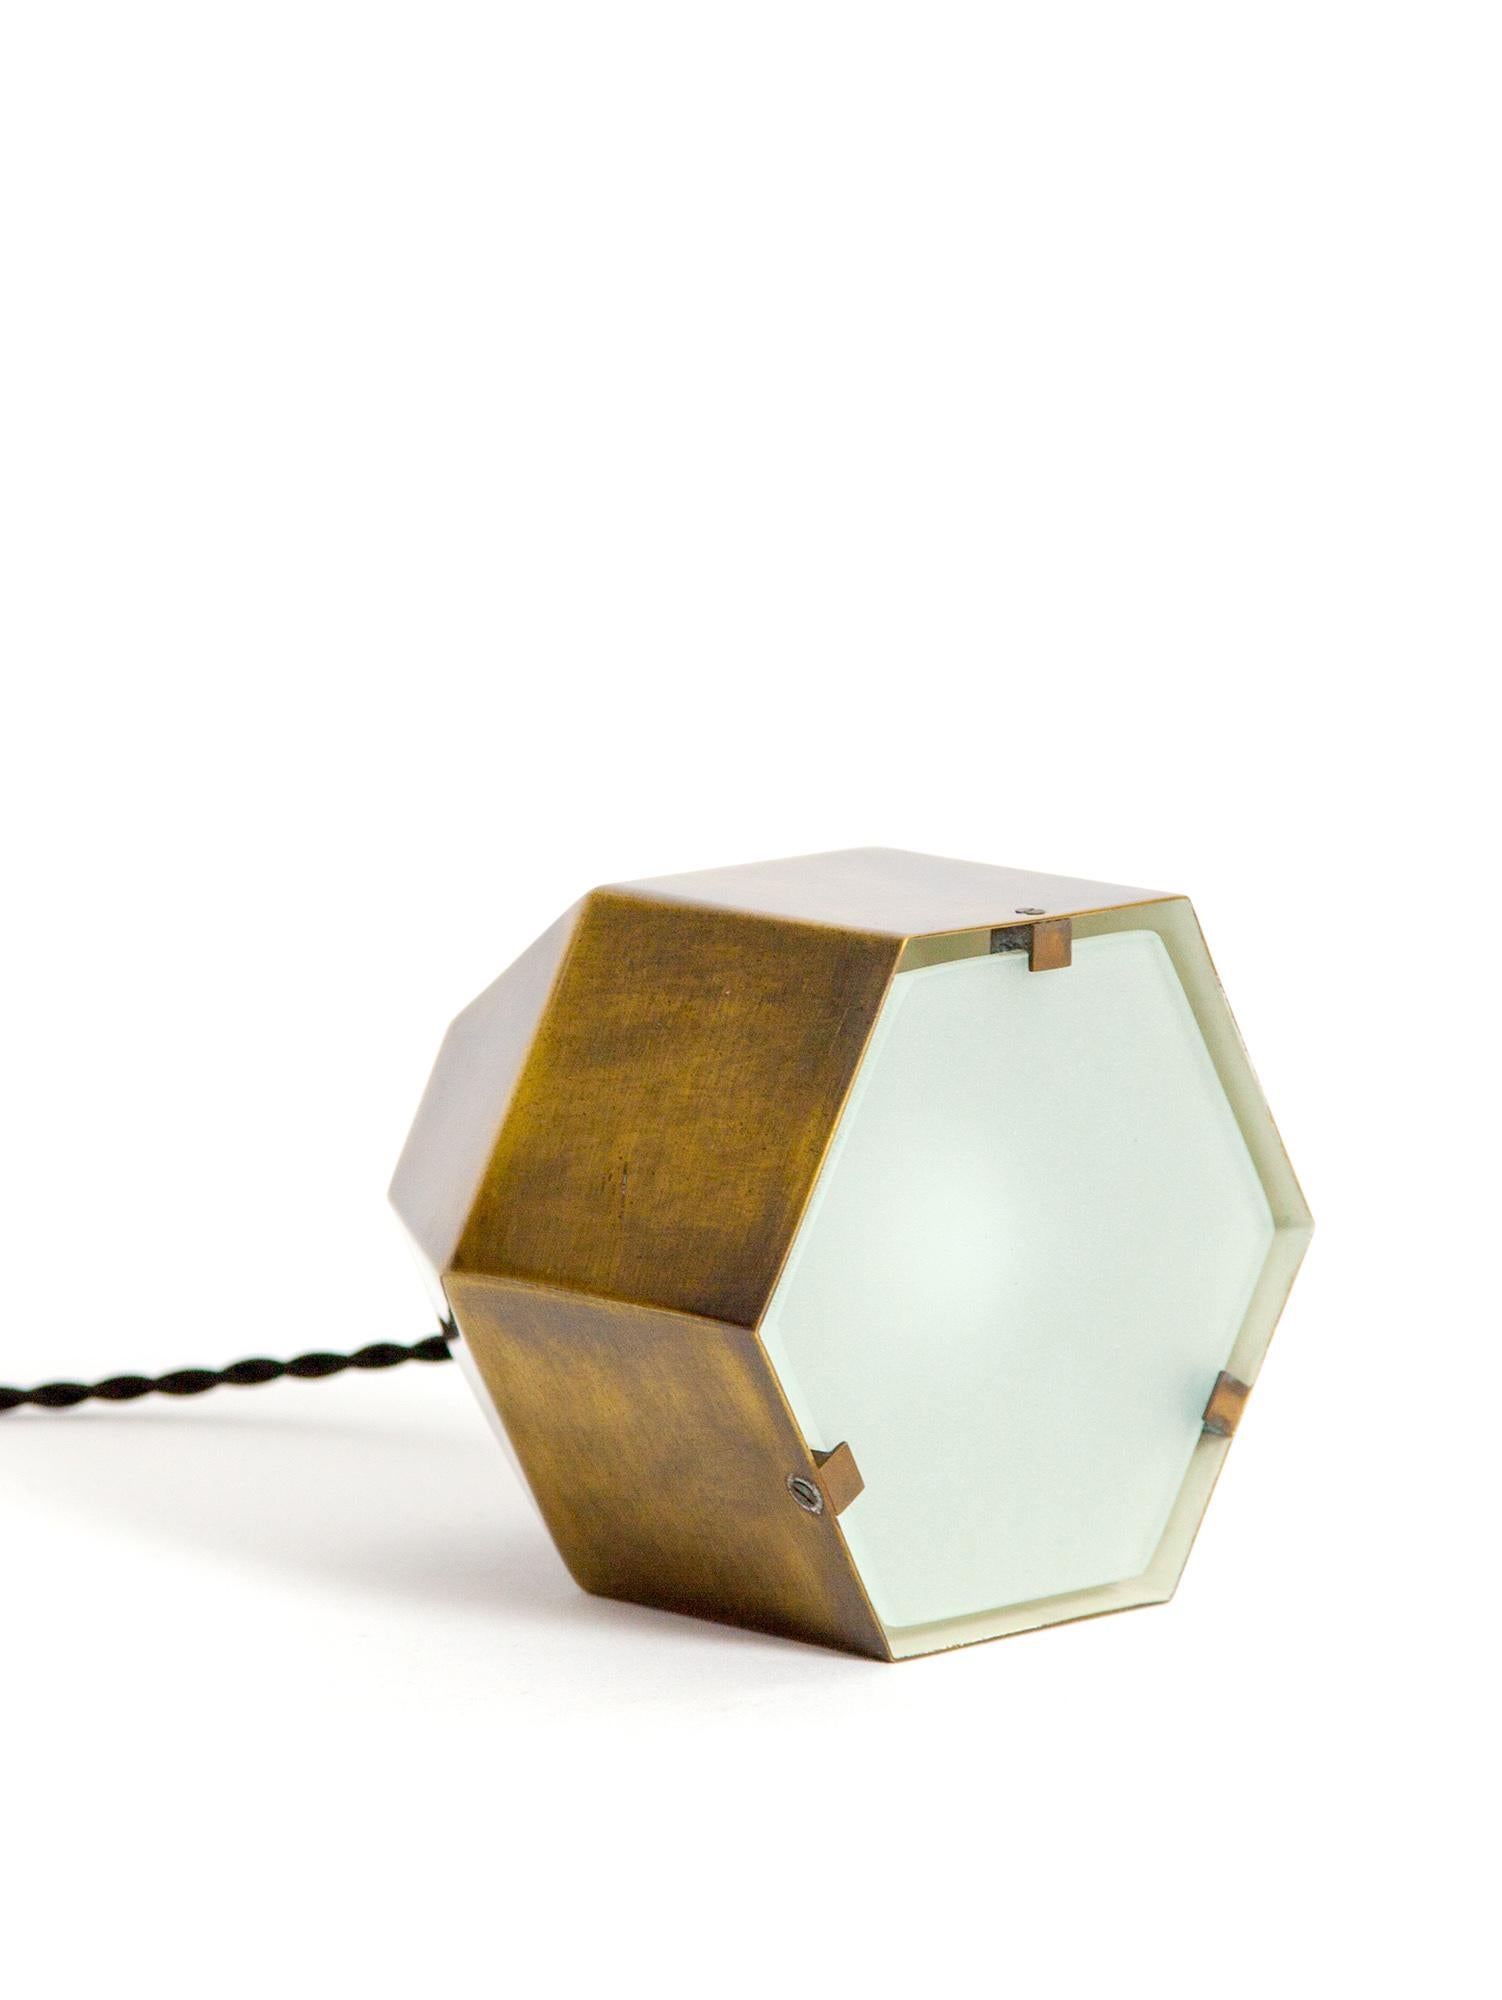 Very rare and highly collectible, model #2202, table lamp designed by Max Ingrand for Fontana Arte. The playful hexagon shape allows the lamp to sit in multiple positions. The beautifully crafted body, made from oxidized brass, holds the etched